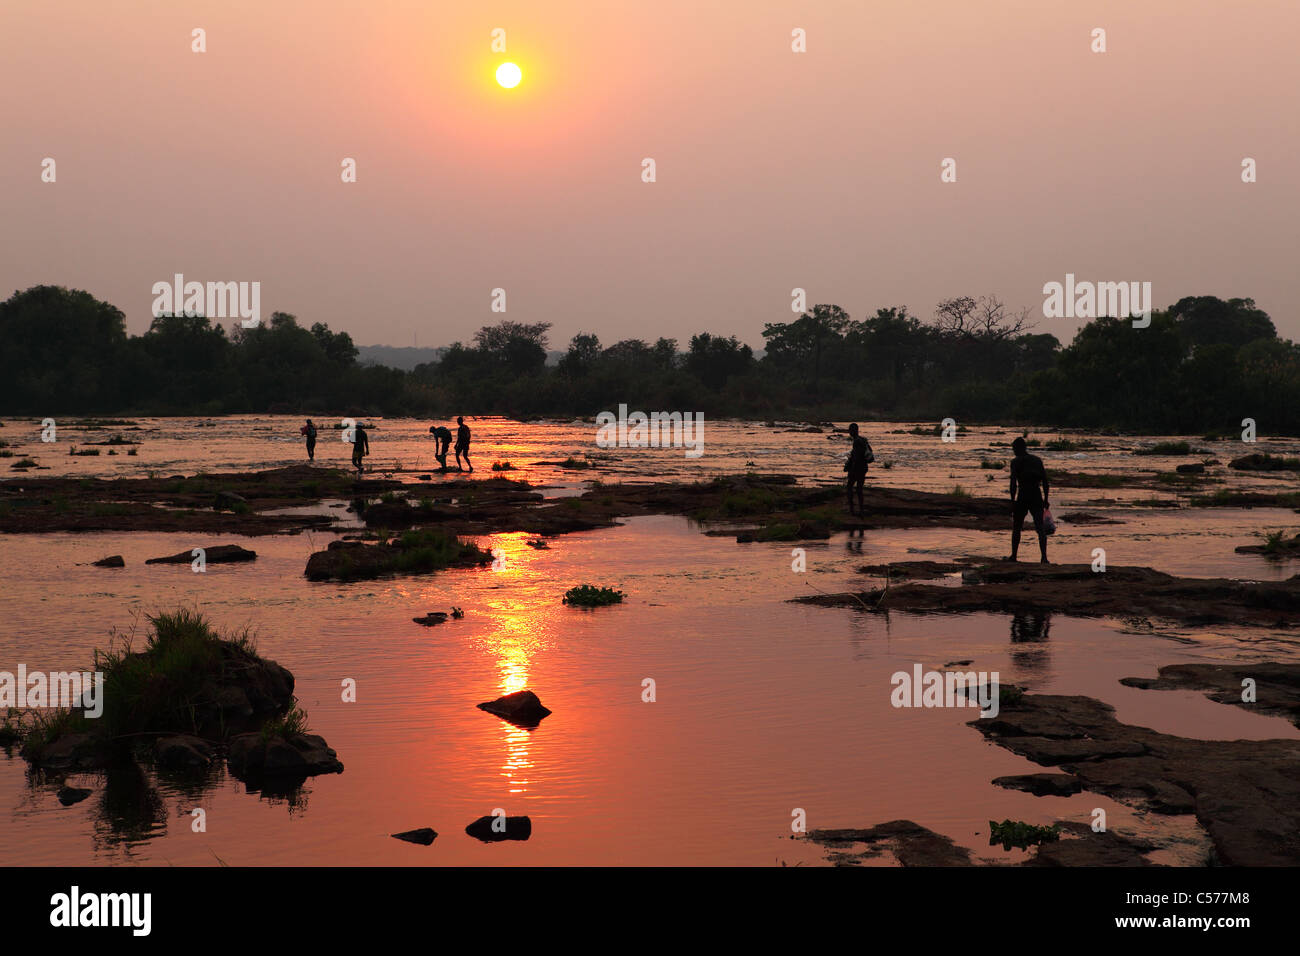 A group of men make an illegal border crossing over a ford in the Zambazi River between Zambia and Zimbabwe. Stock Photo